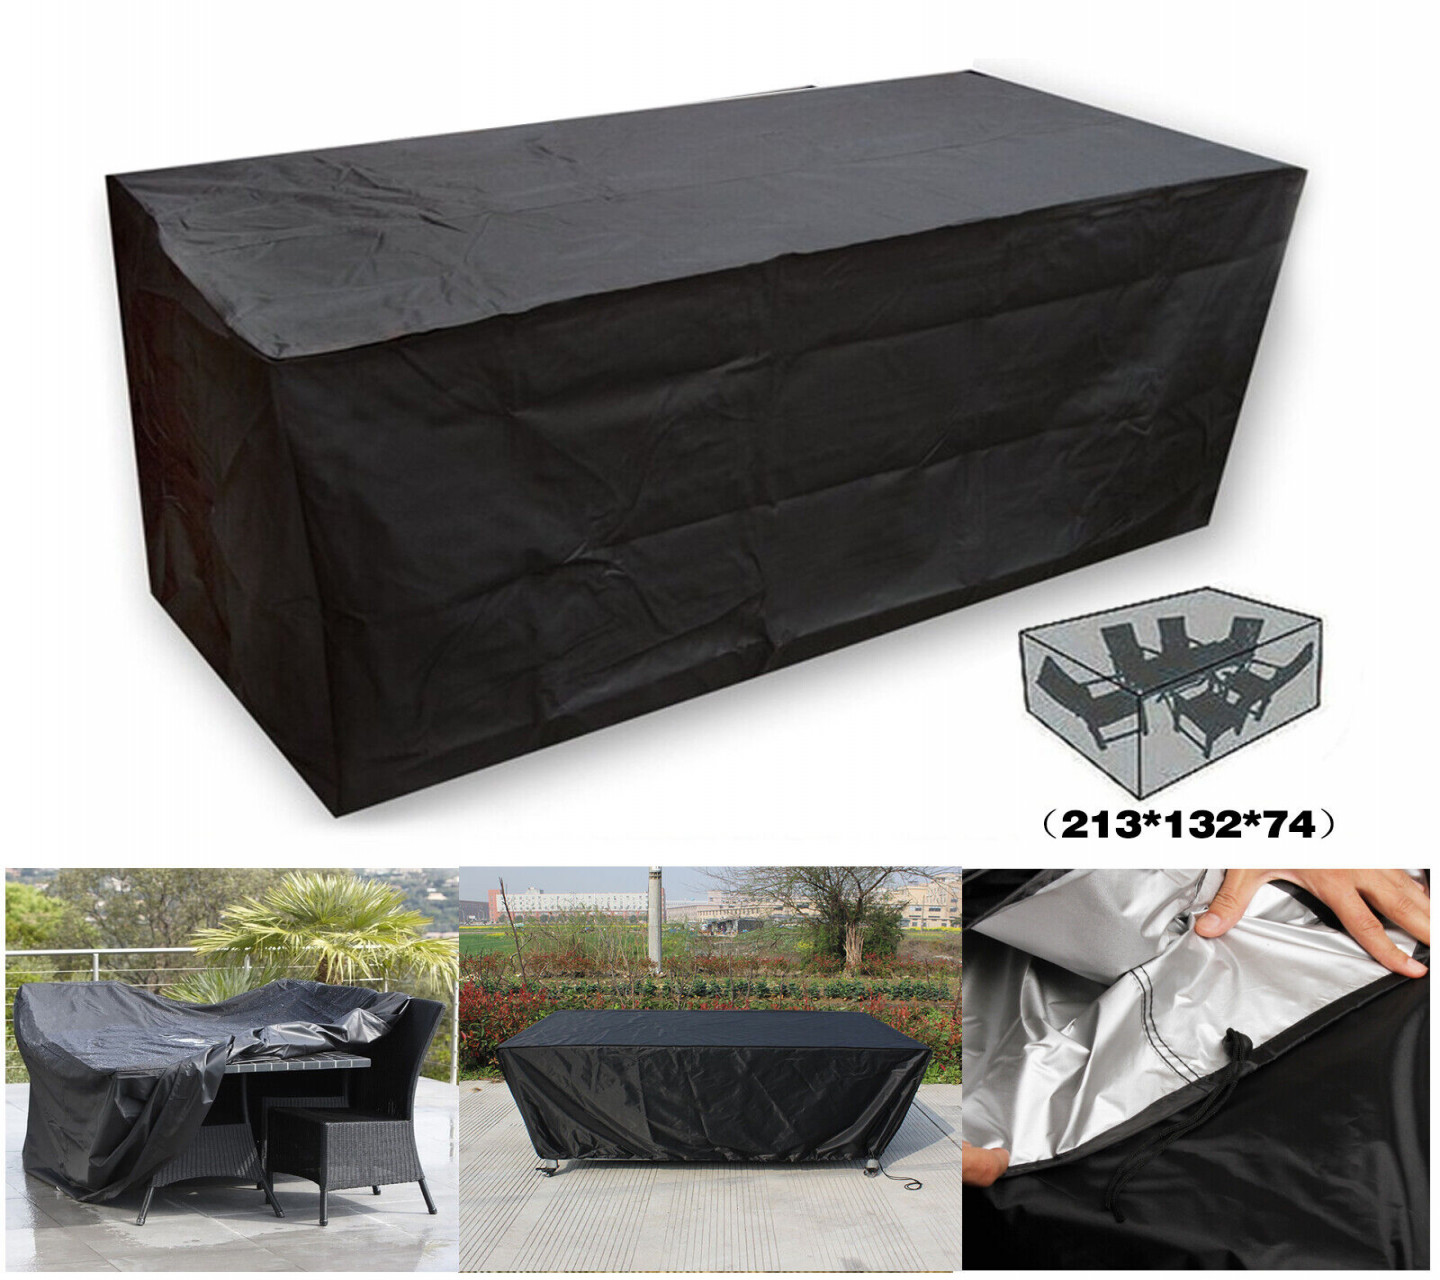 Patio Furniture With Covers